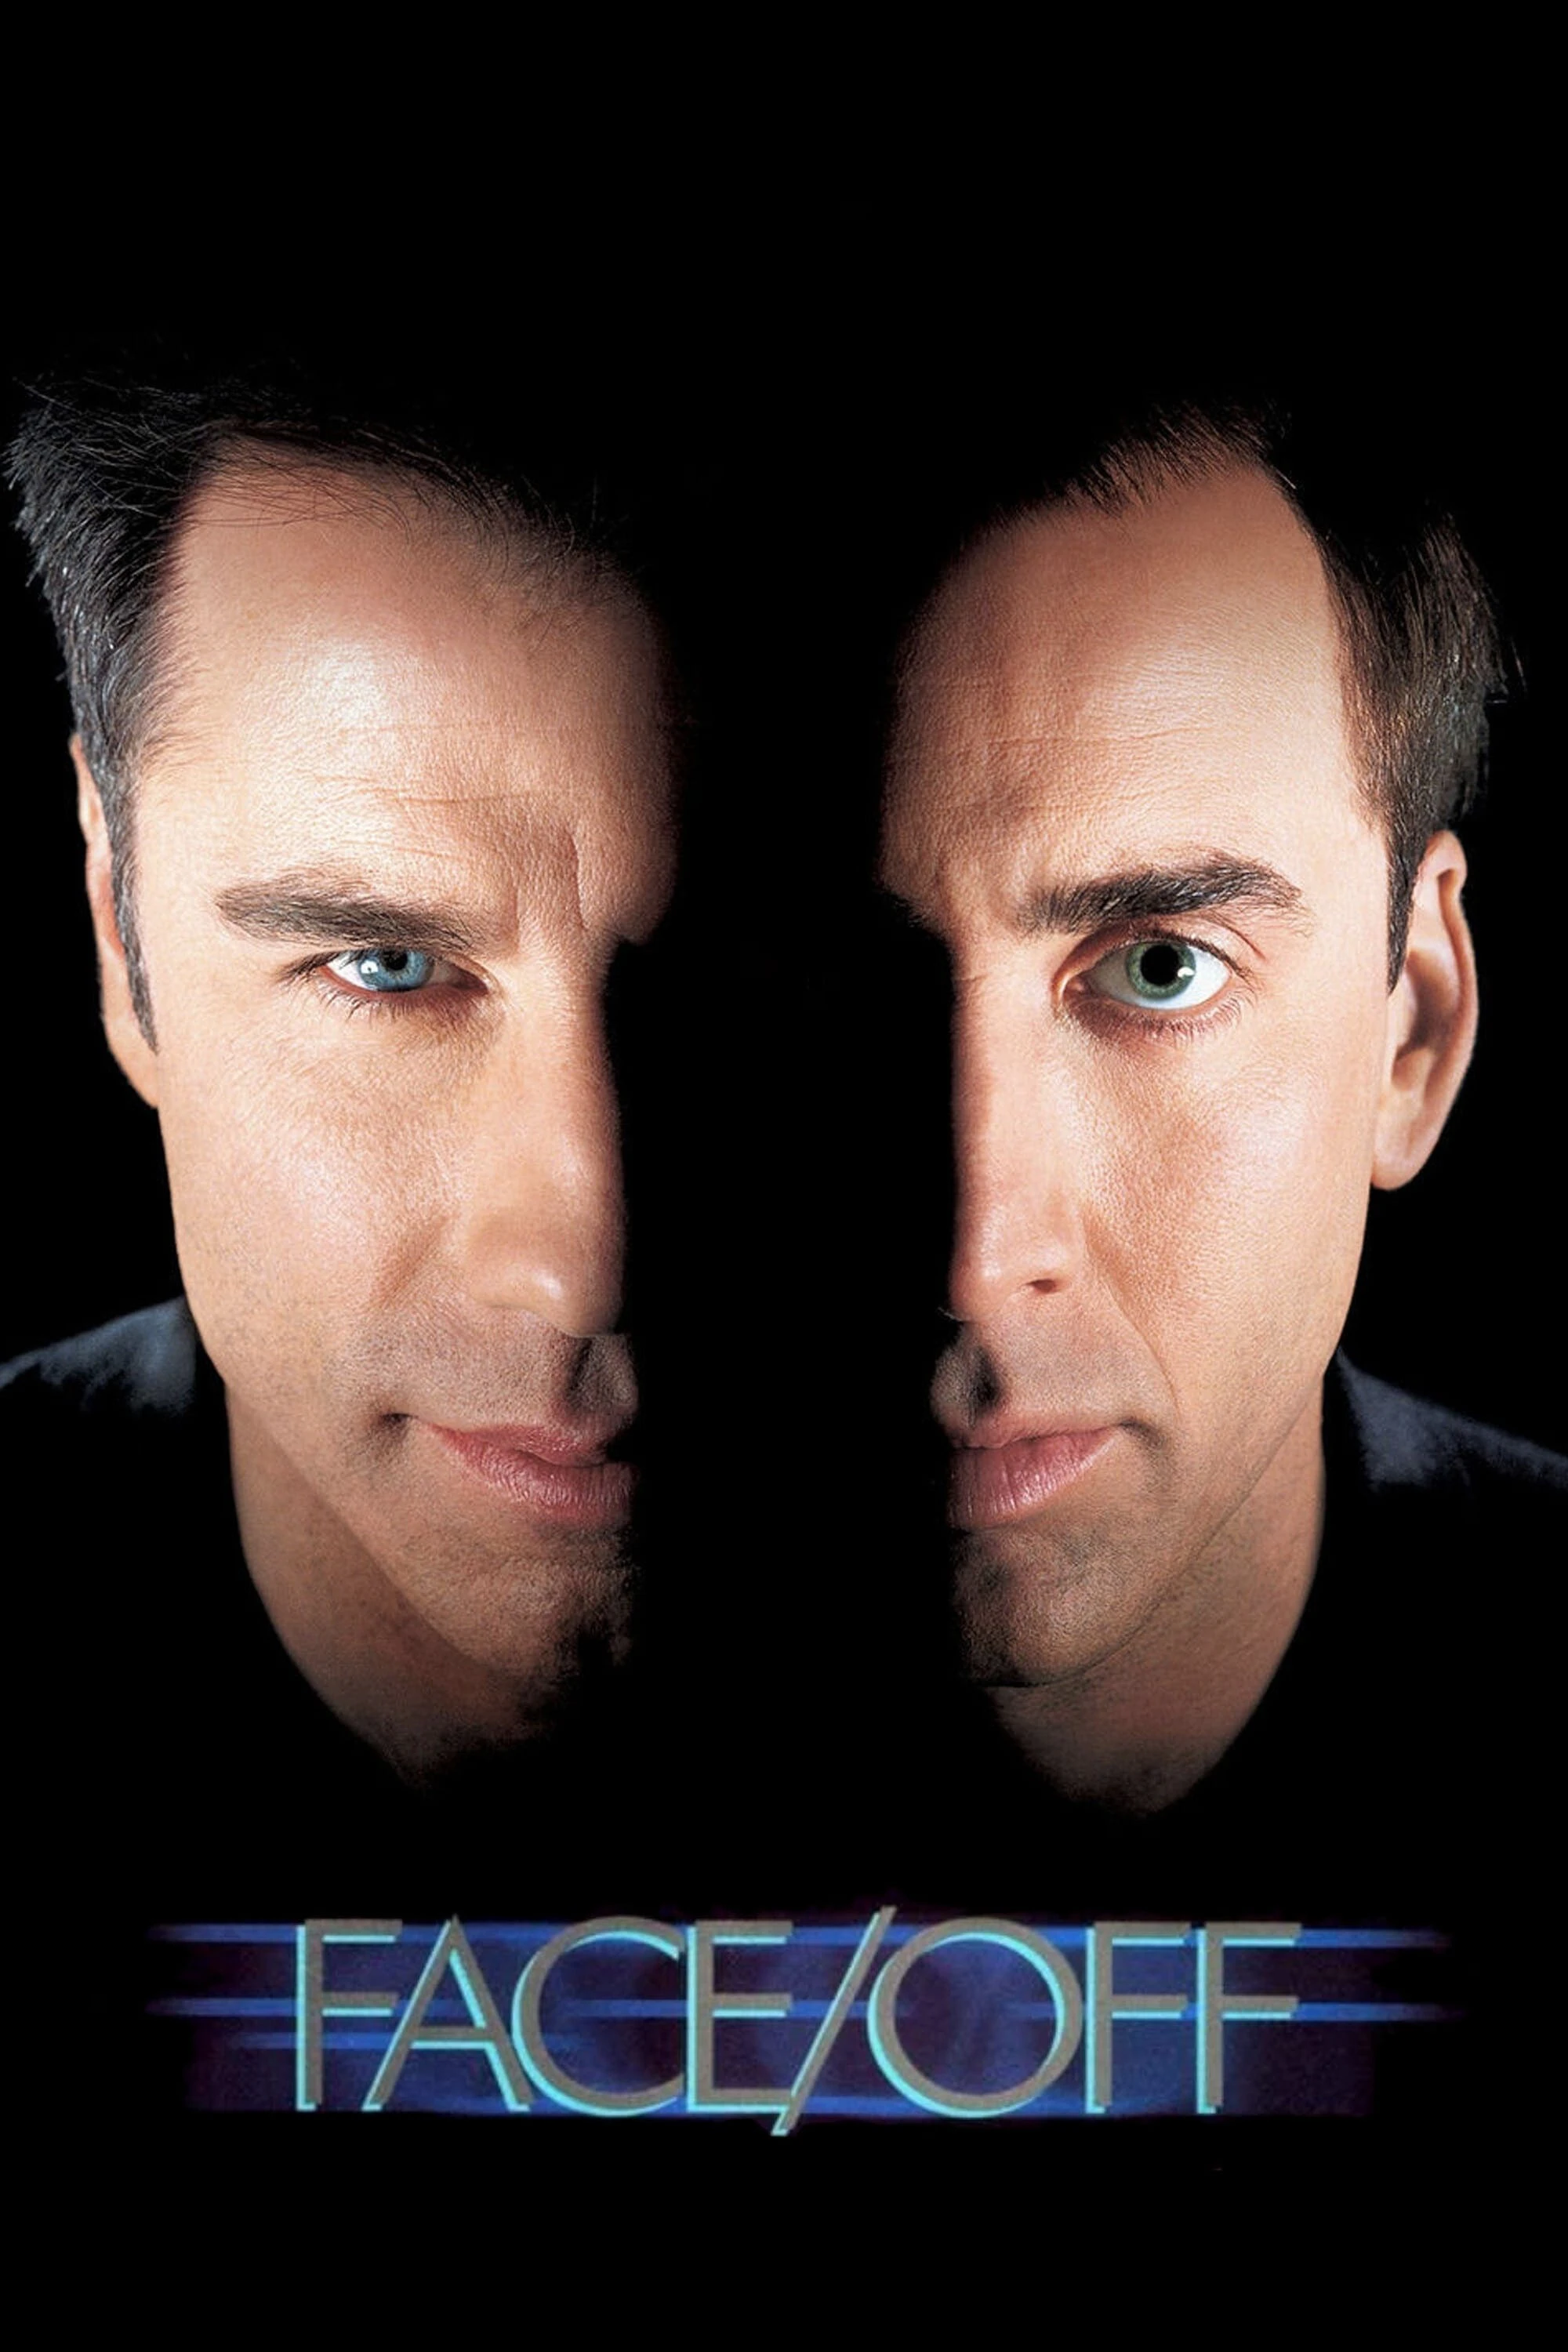 Face/Off | Face/Off (1997)